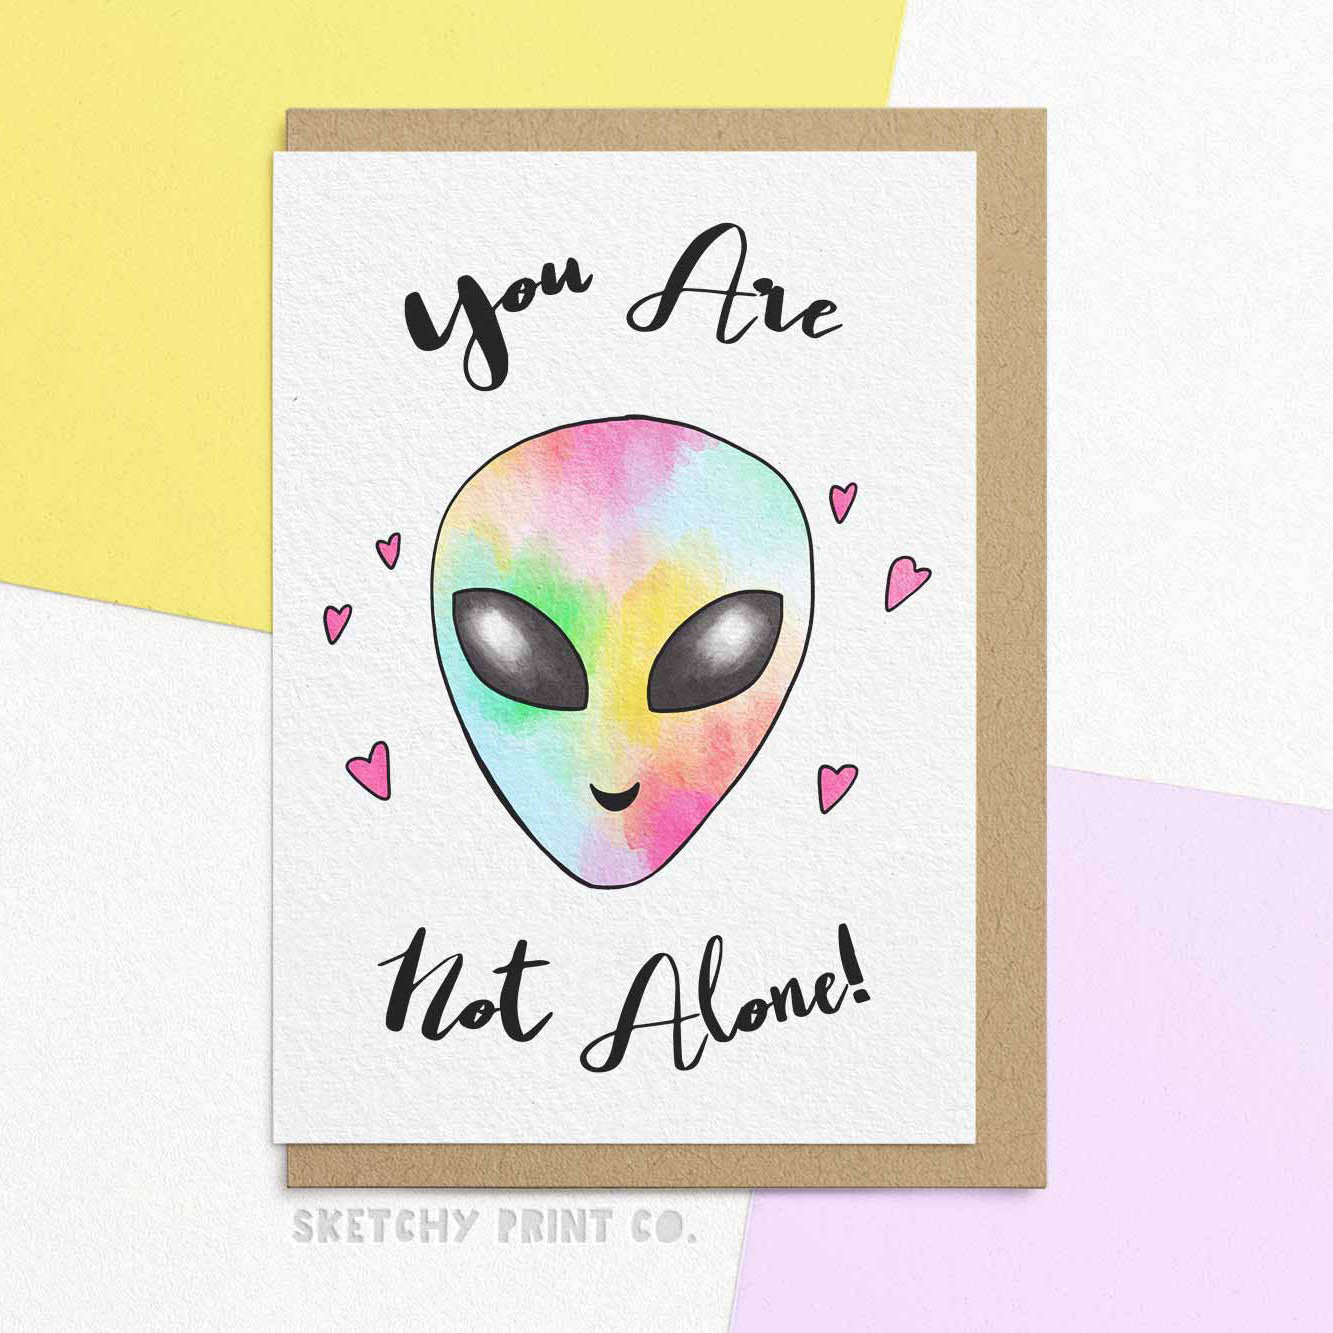 Not Alone Pride Funny Rude Silly Birthday Cards boyfriend girlfriend unique gift unusual hilarious illustrated sketchy print co